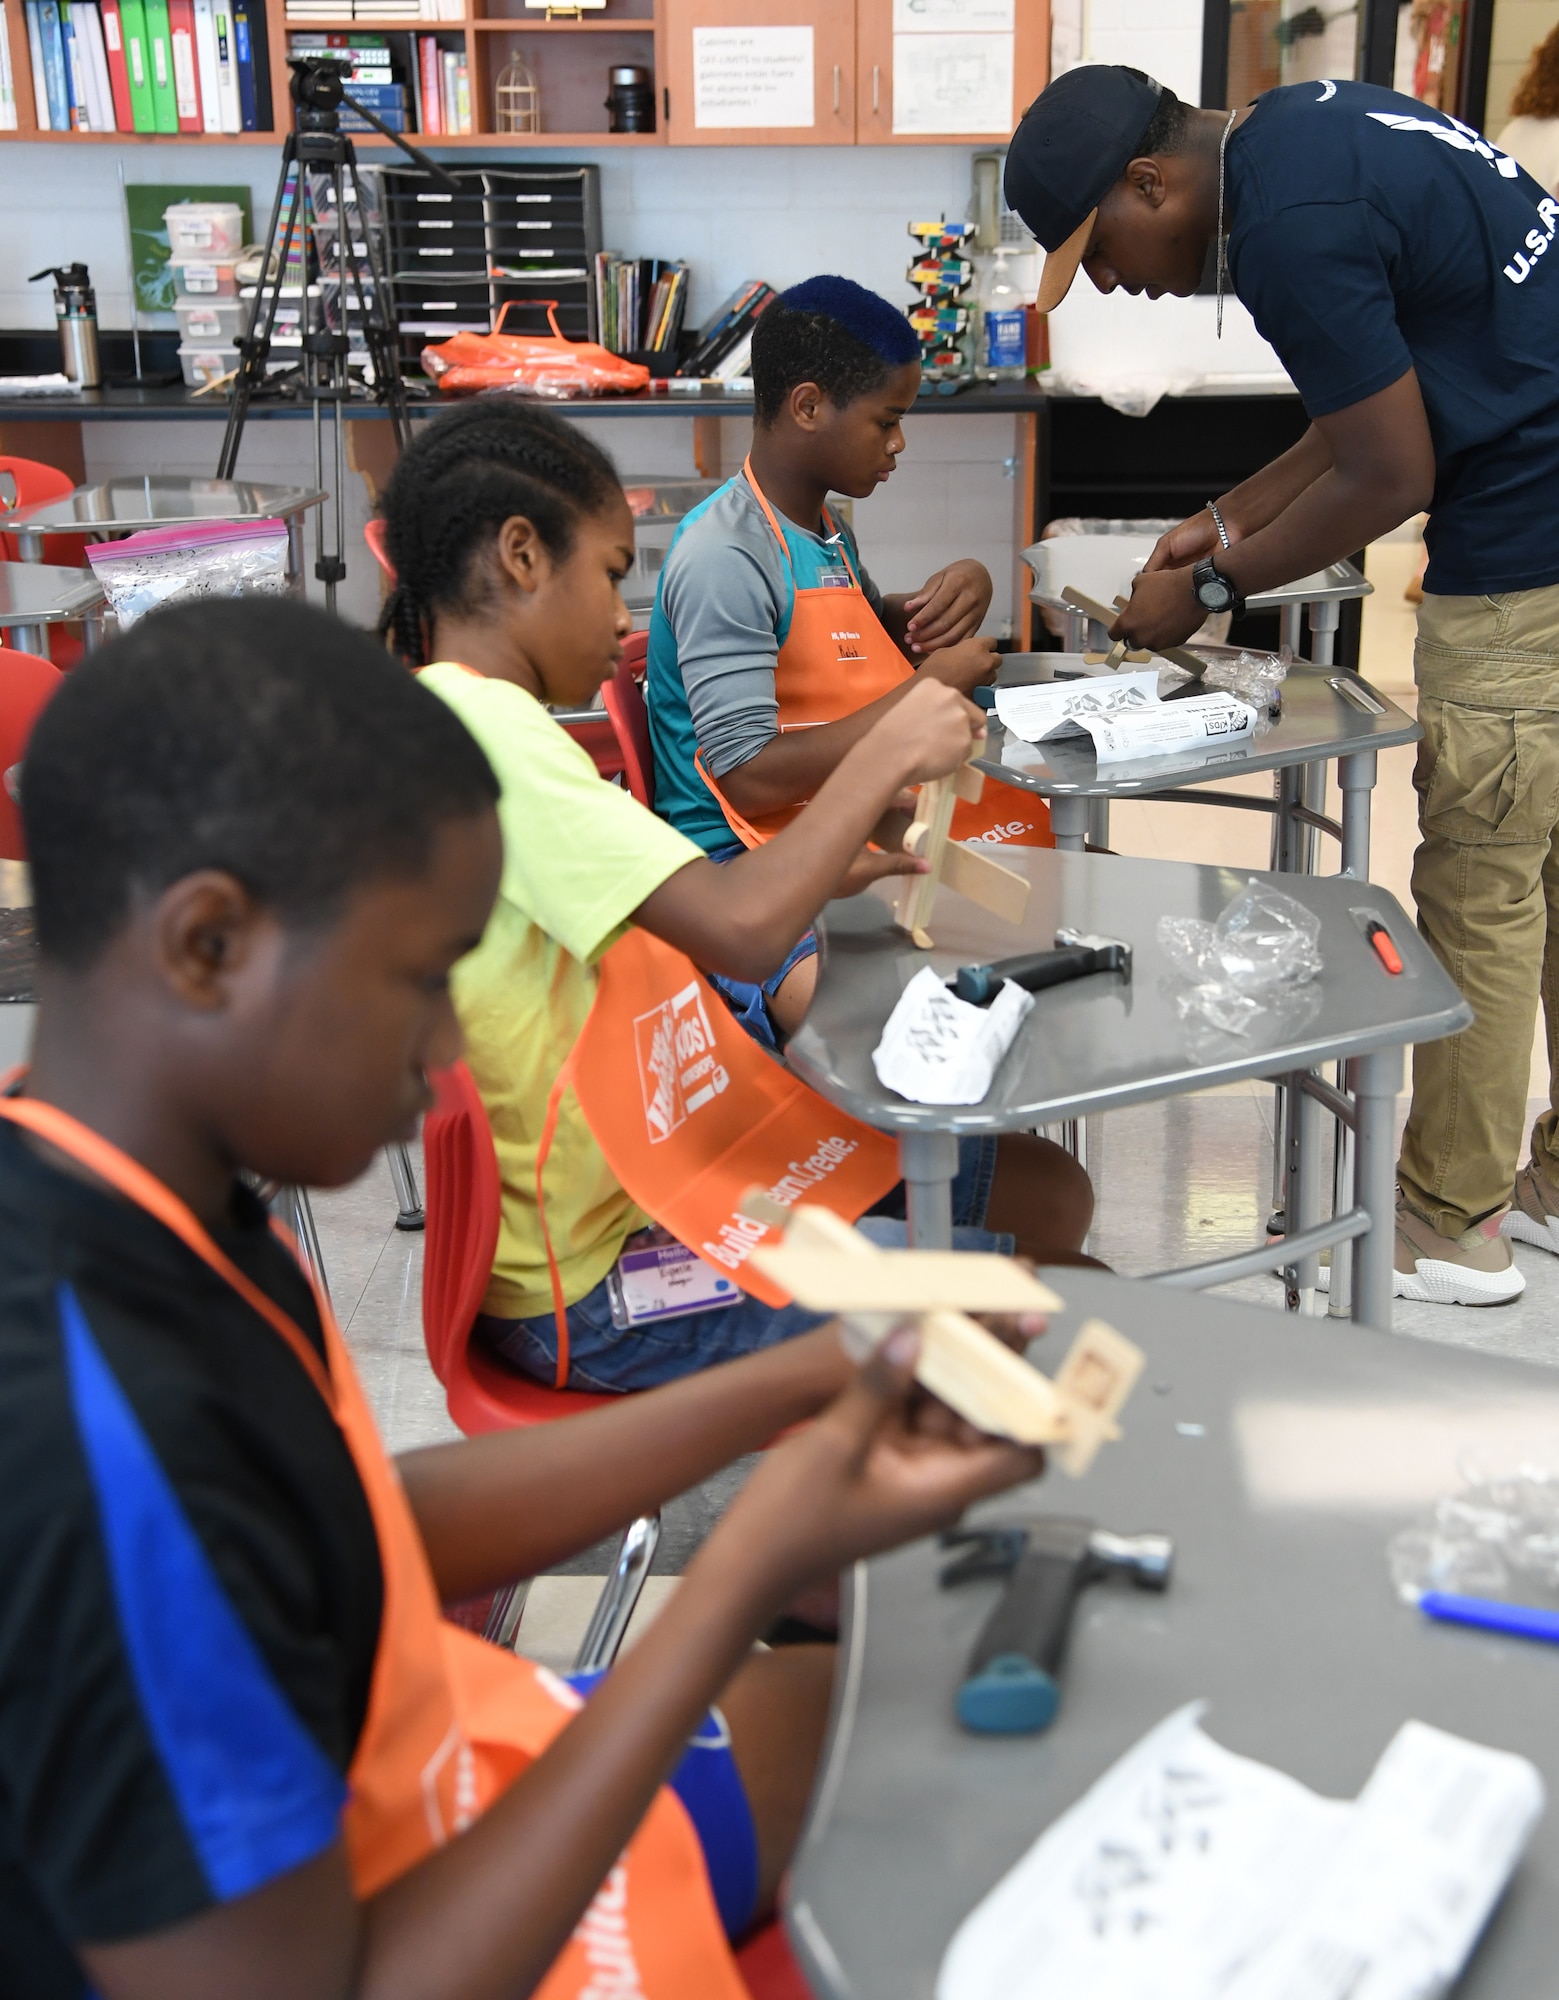 U.S. Air Force Staff Sgt. Dequanzel Davis, 338th Training Squadron radio frequency transmissions systems instructor, and Kaleb Foggie, Biloxi Junior High School eighth grade student, assemble a wooden airplane during the Biloxi Public Schools Science, Technology, Engineering and Mathematics Summer Camp program at Biloxi High School in Biloxi, Mississippi, June 25, 2019. The four-day STEM summer program teaches first through seventh grade students skills for future careers and fosters valuable life skills like problem solving, creativity and collaboration. Keesler personnel volunteered their time to lead instructions on various projects. (U.S. Air Force photo by Kemberly Groue)